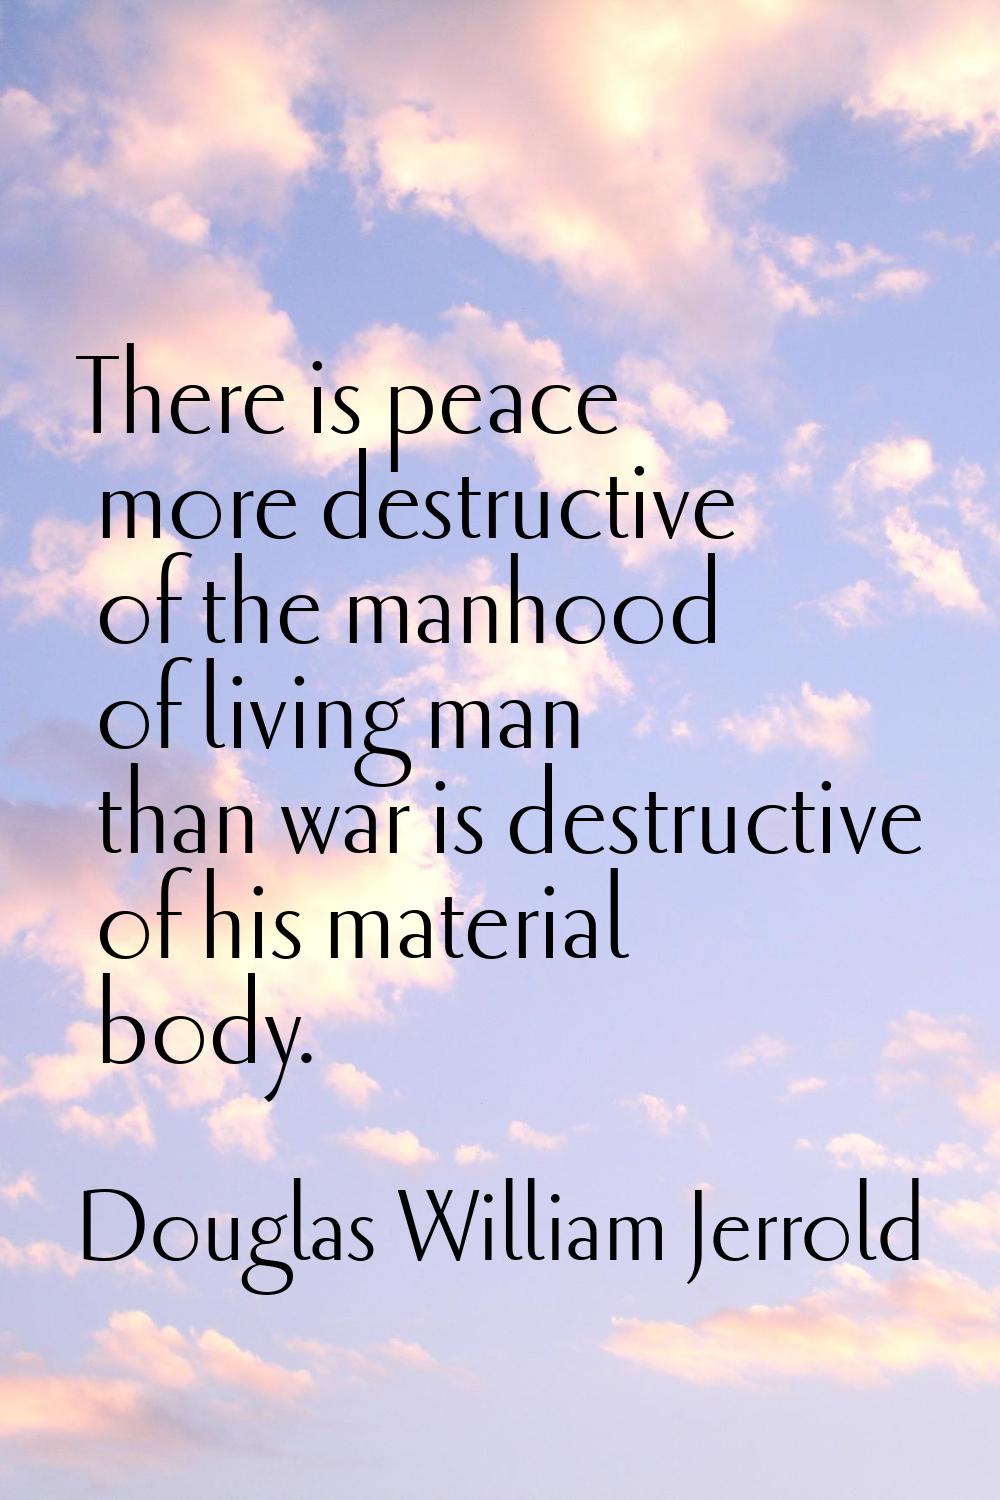 There is peace more destructive of the manhood of living man than war is destructive of his materia